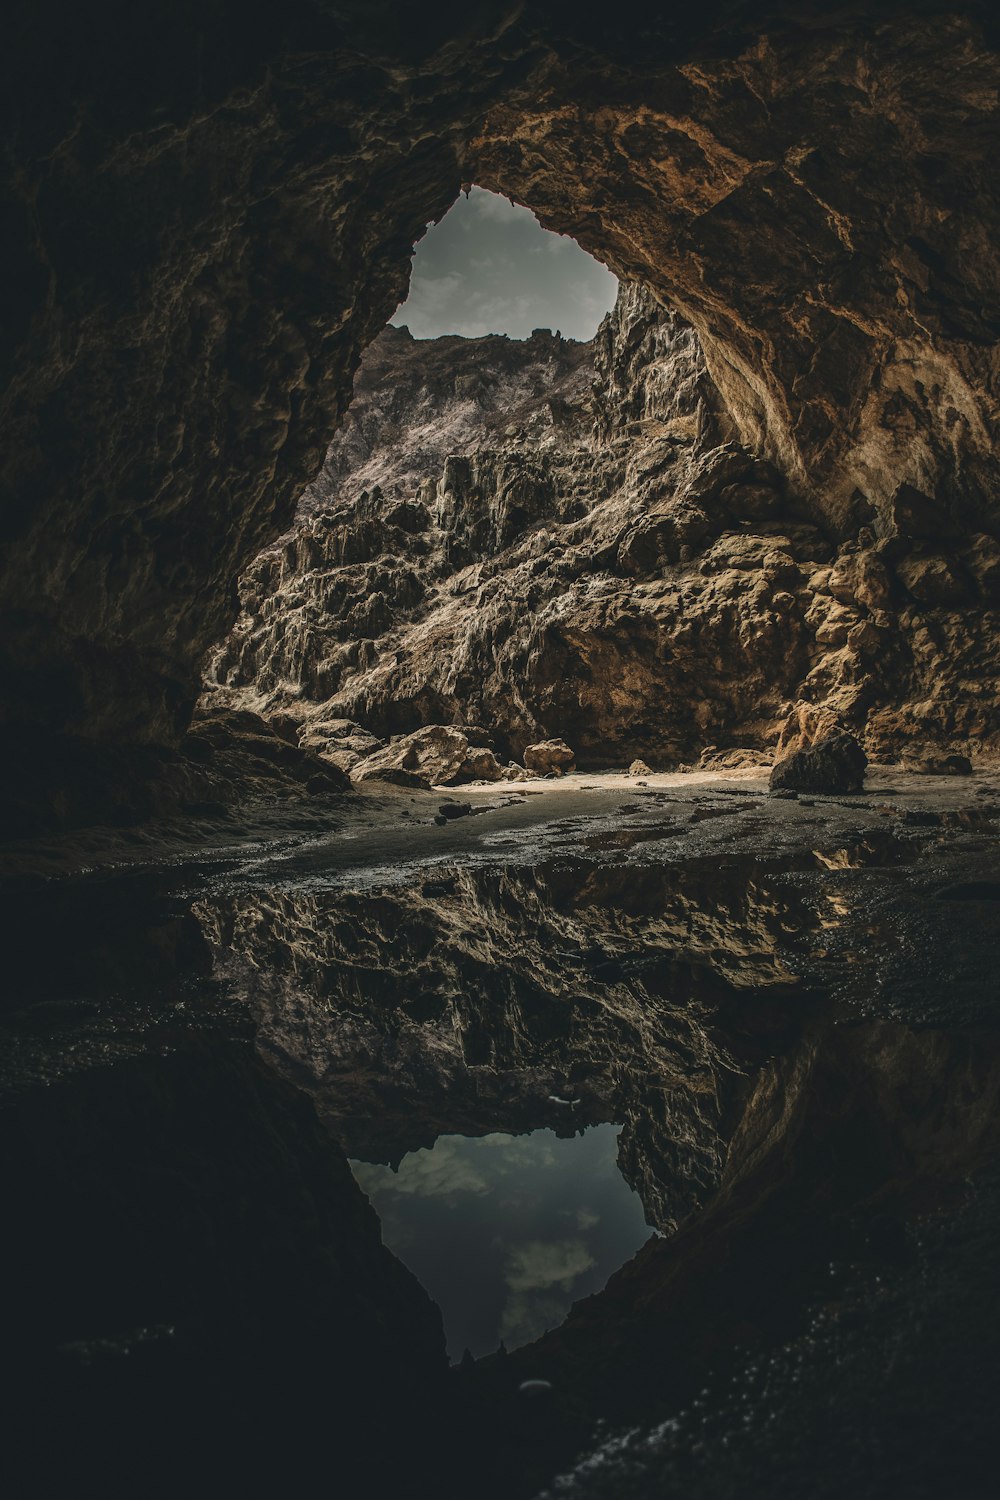 reflection of brown cave on body of water